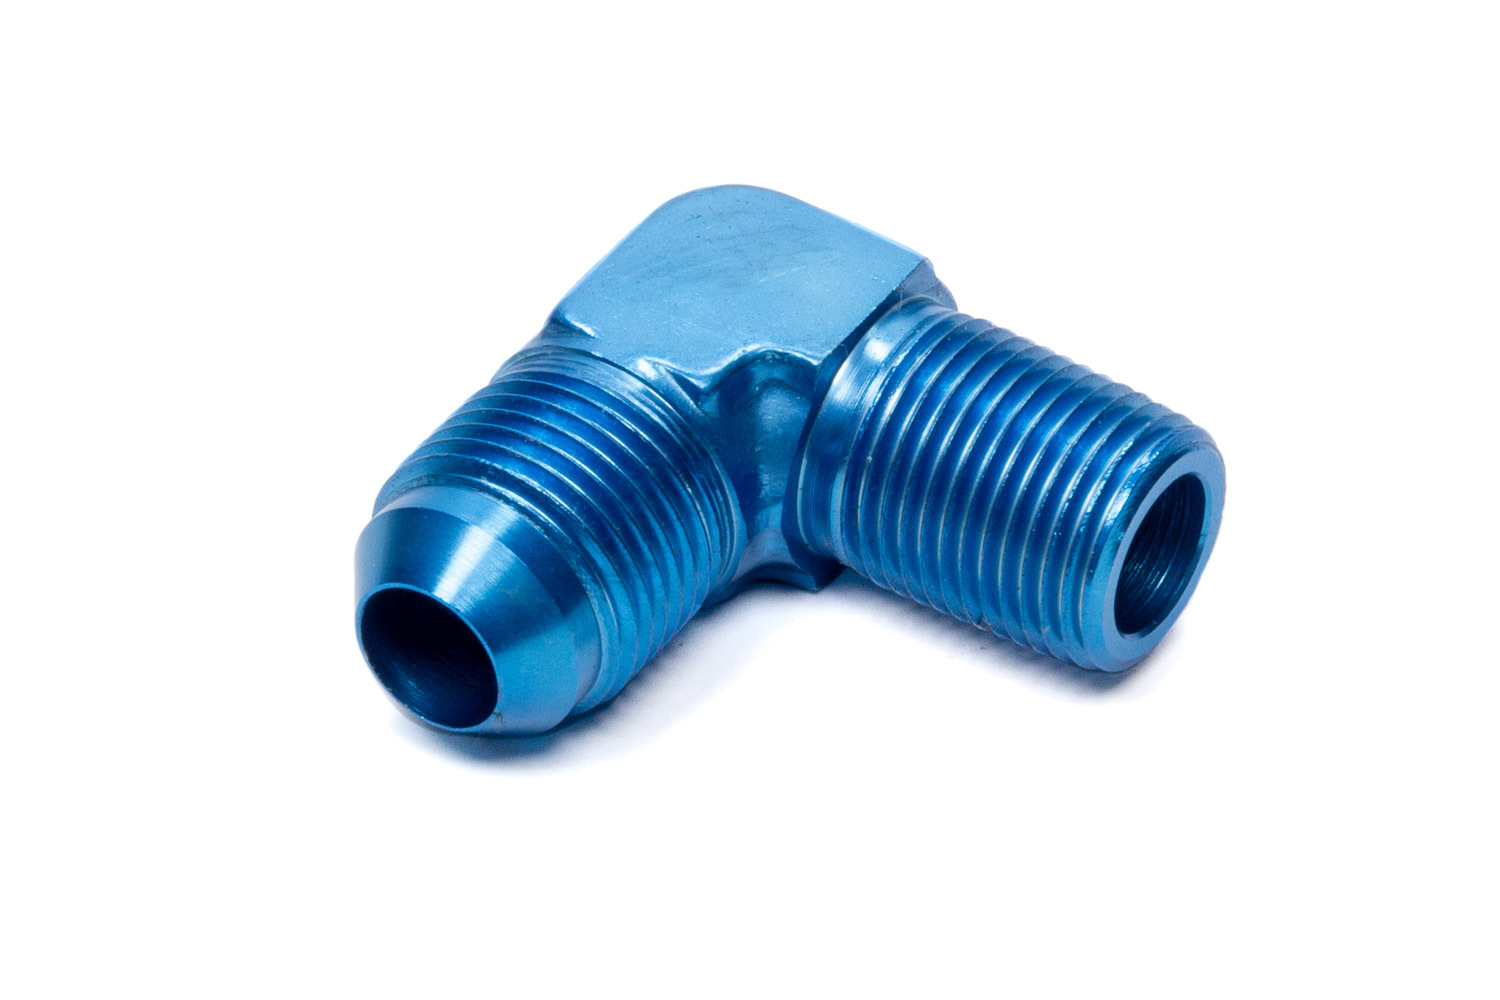 Fragola 482207 - Fitting, Adapter, 90 Degree, 8 AN Male to 1/4 in NPT Male, Aluminum, Blue Anodized, Each